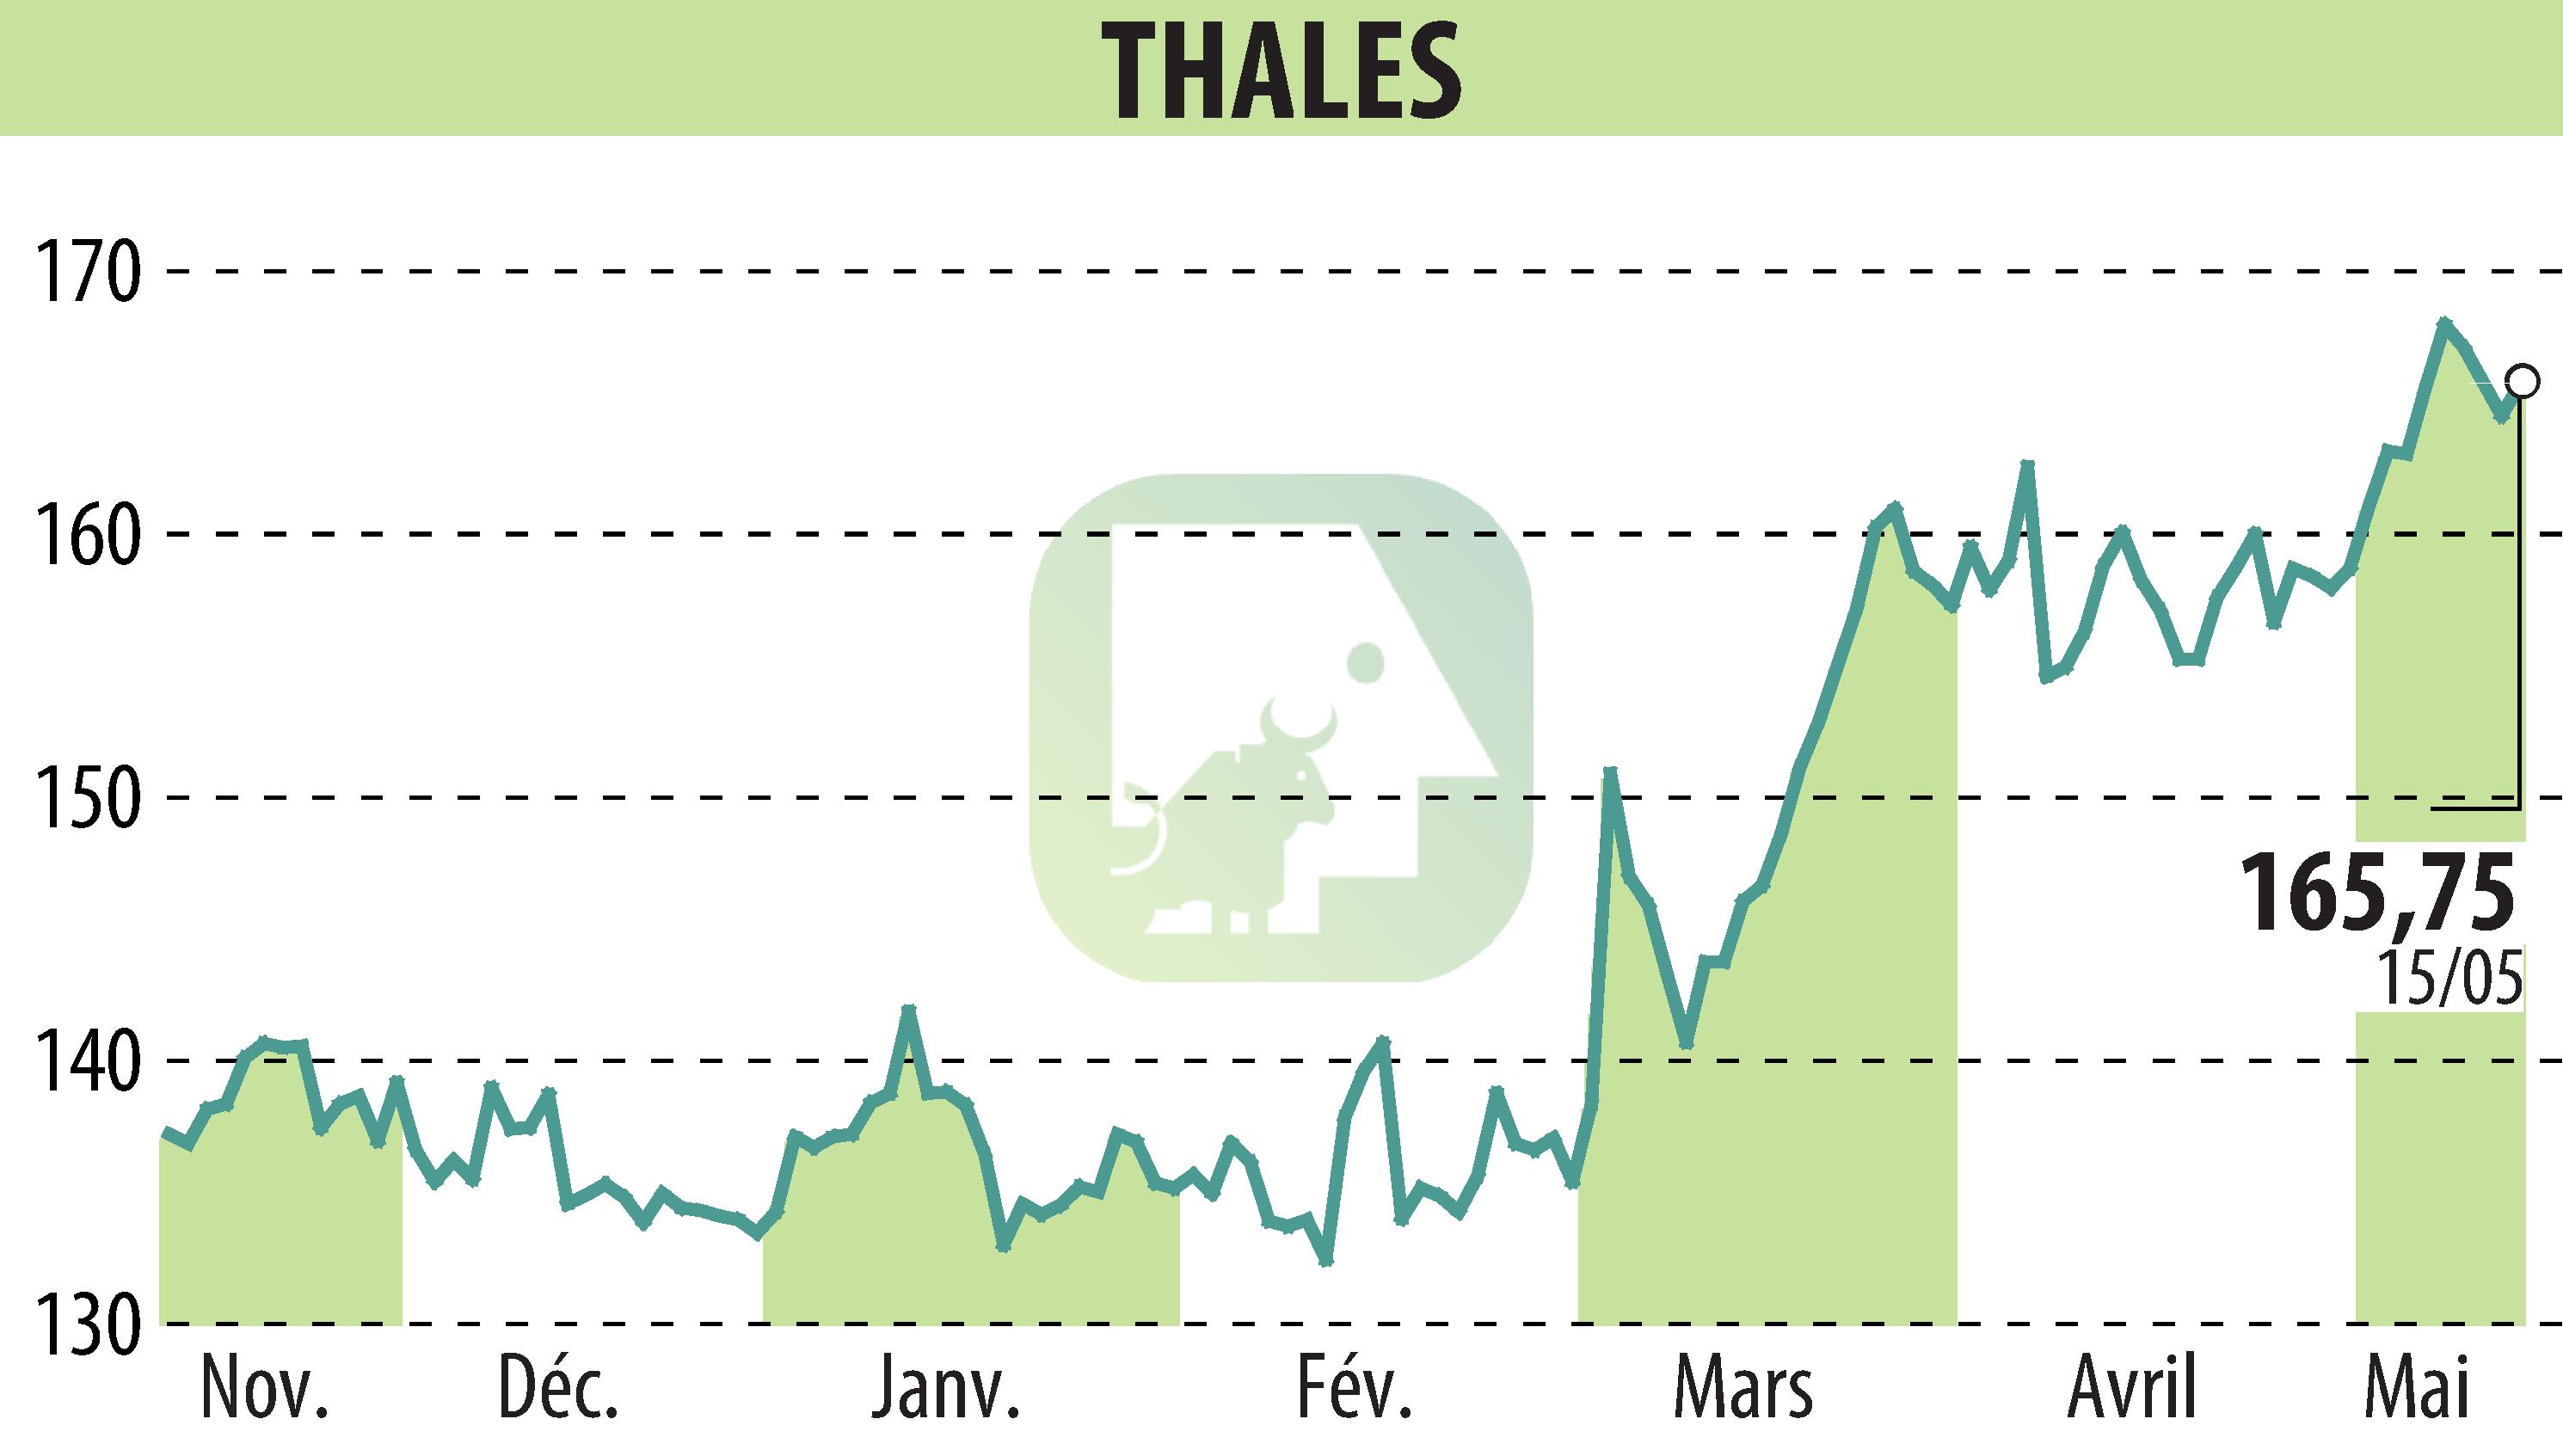 Stock price chart of THALES (EPA:HO) showing fluctuations.